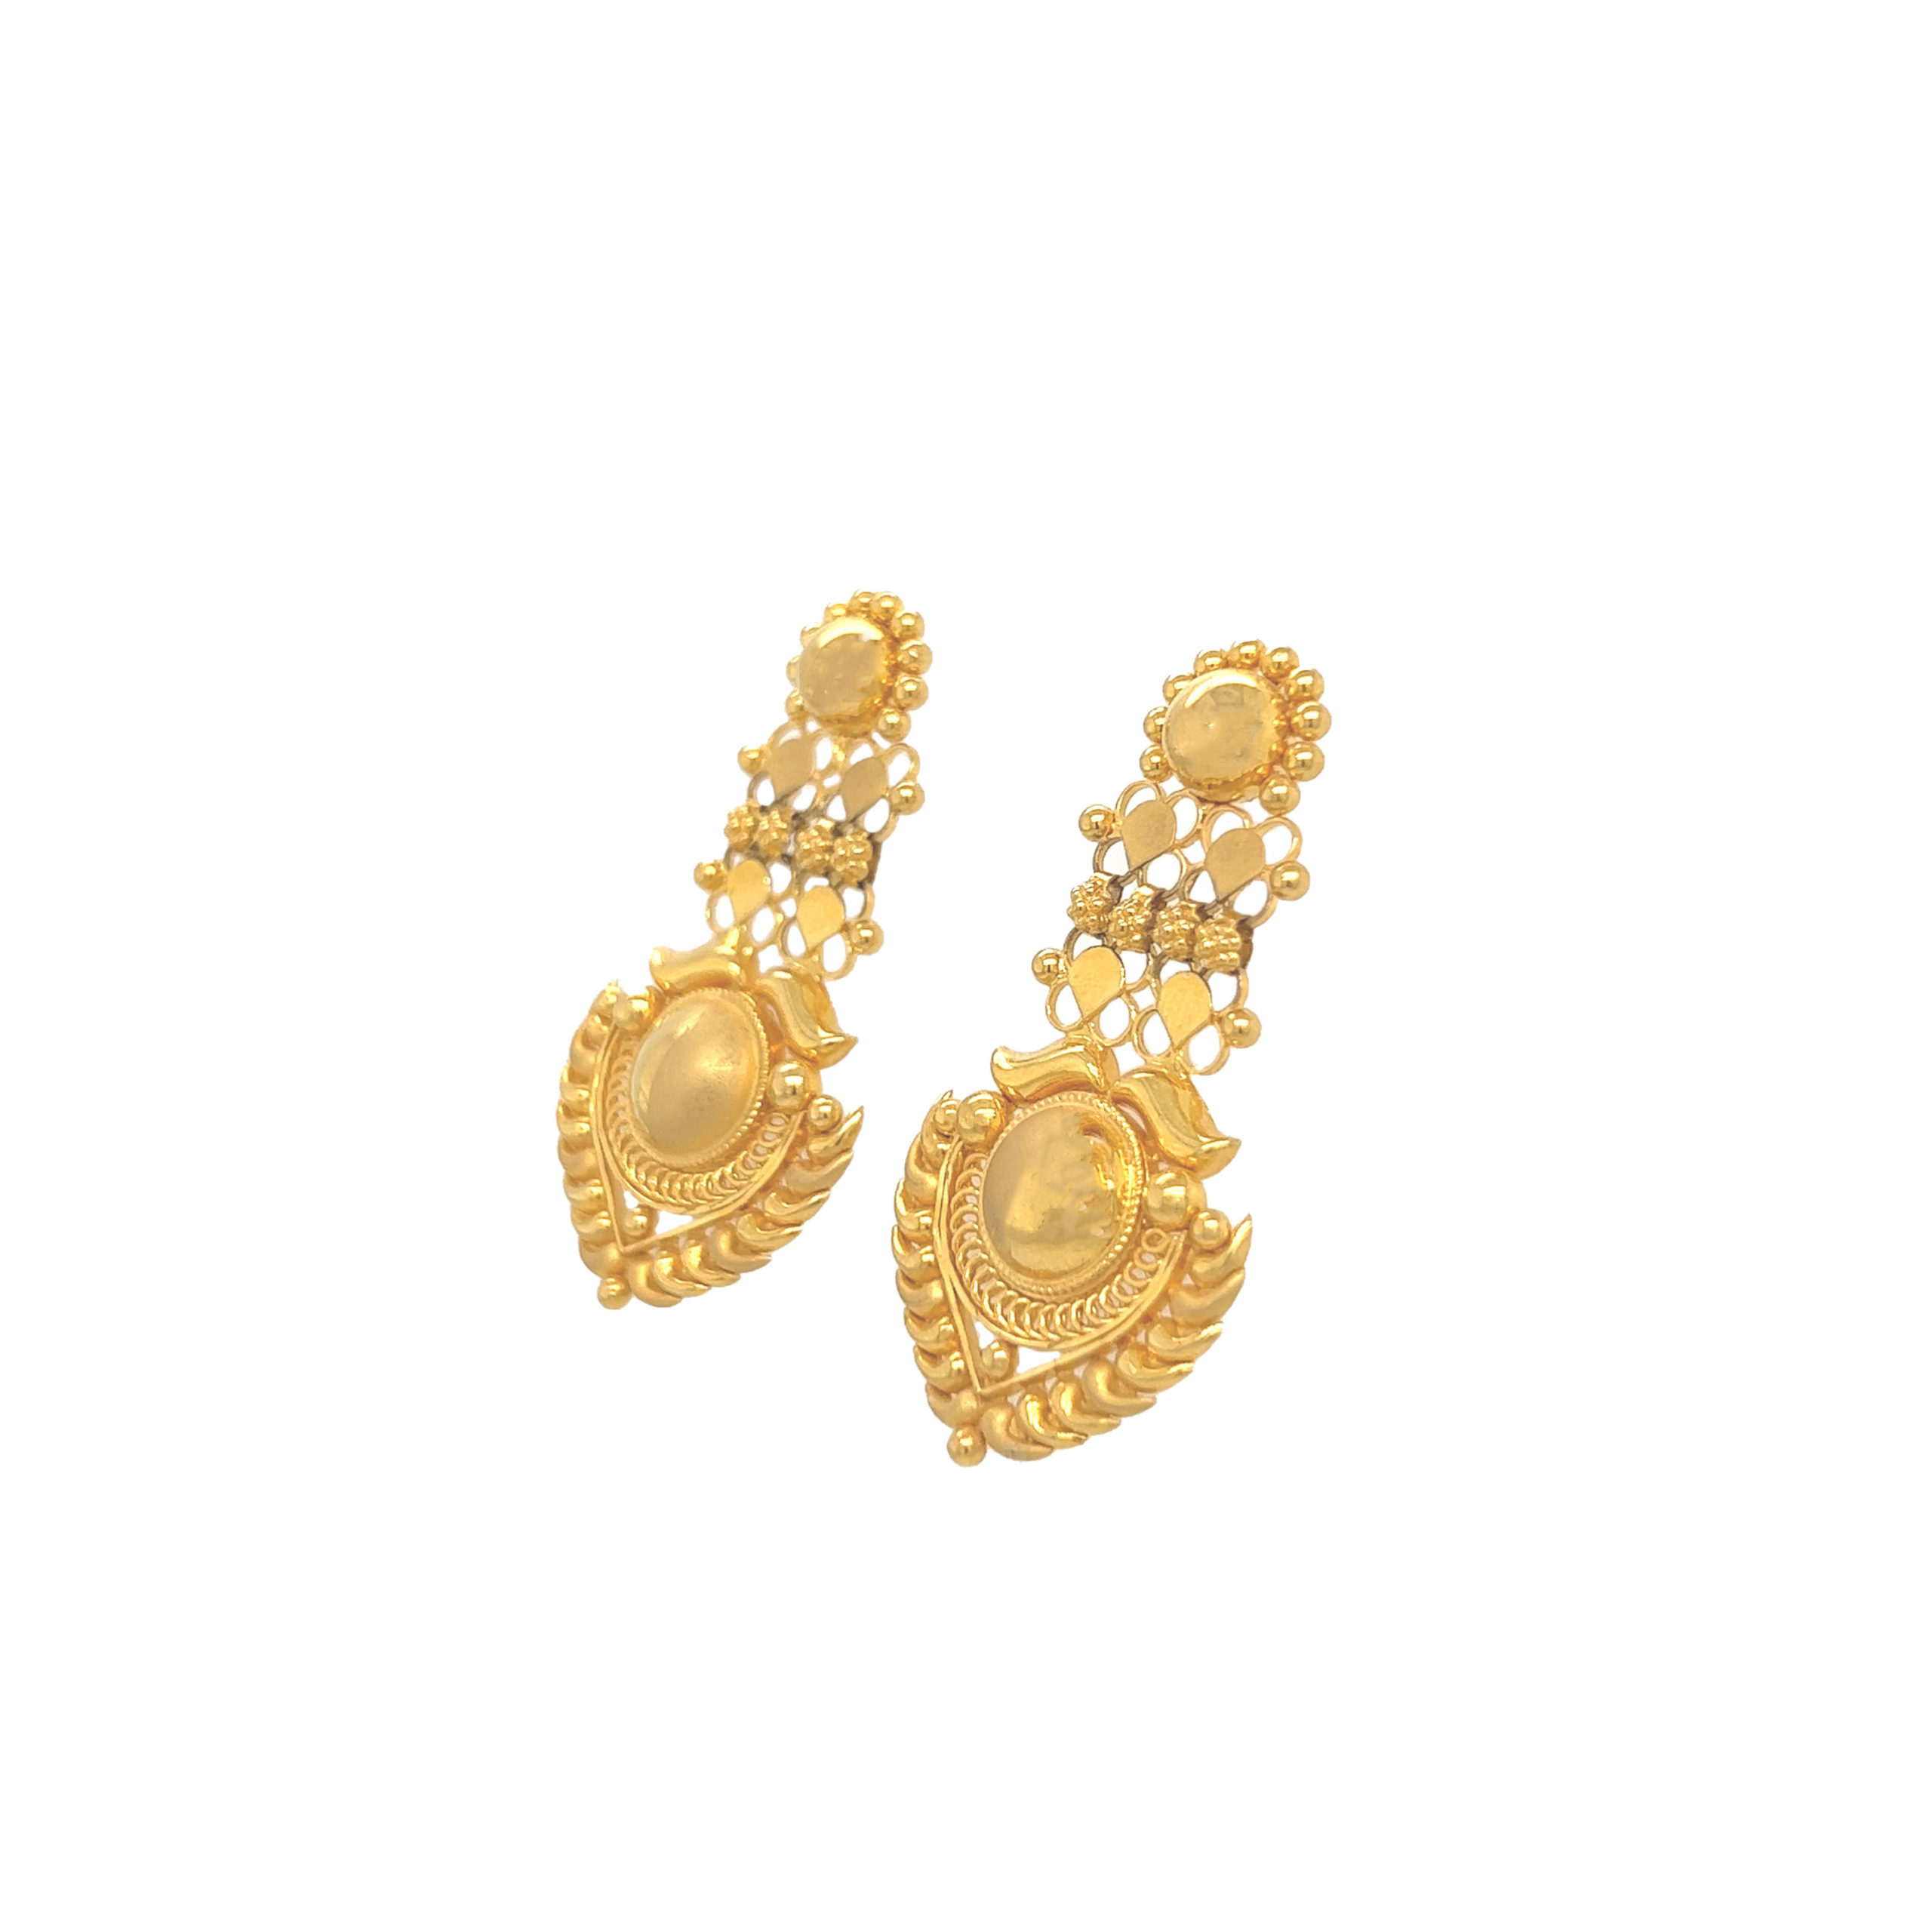 Buy quality Spectacular gold hanging earring design in Pune